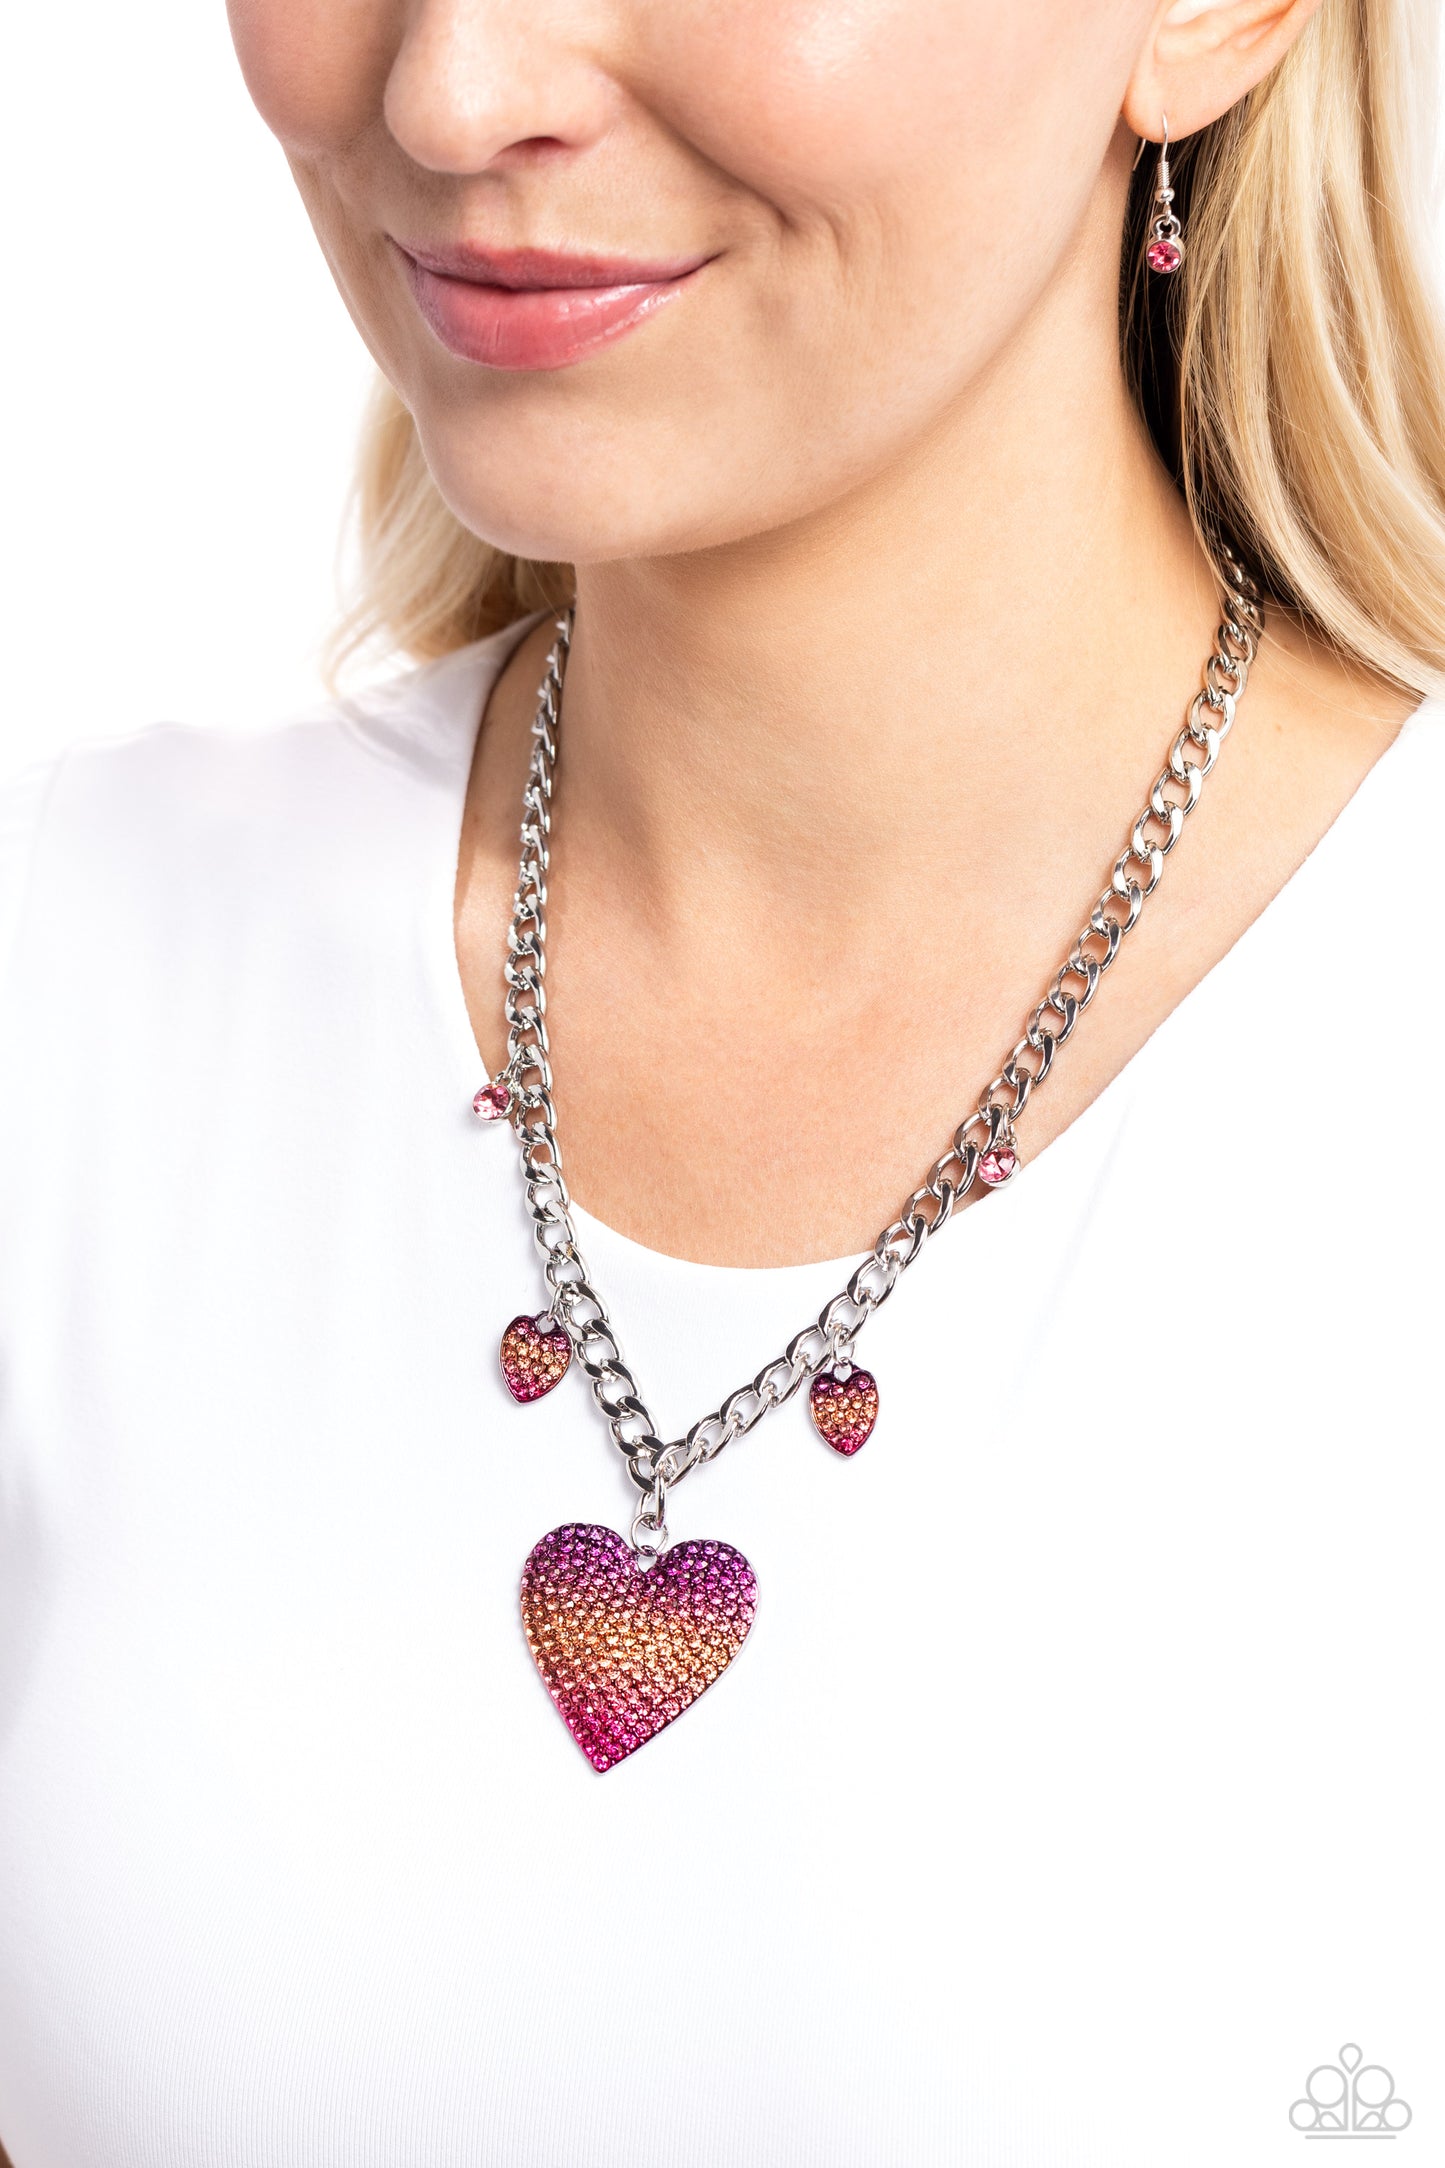 For the Most HEART - Pink Necklace